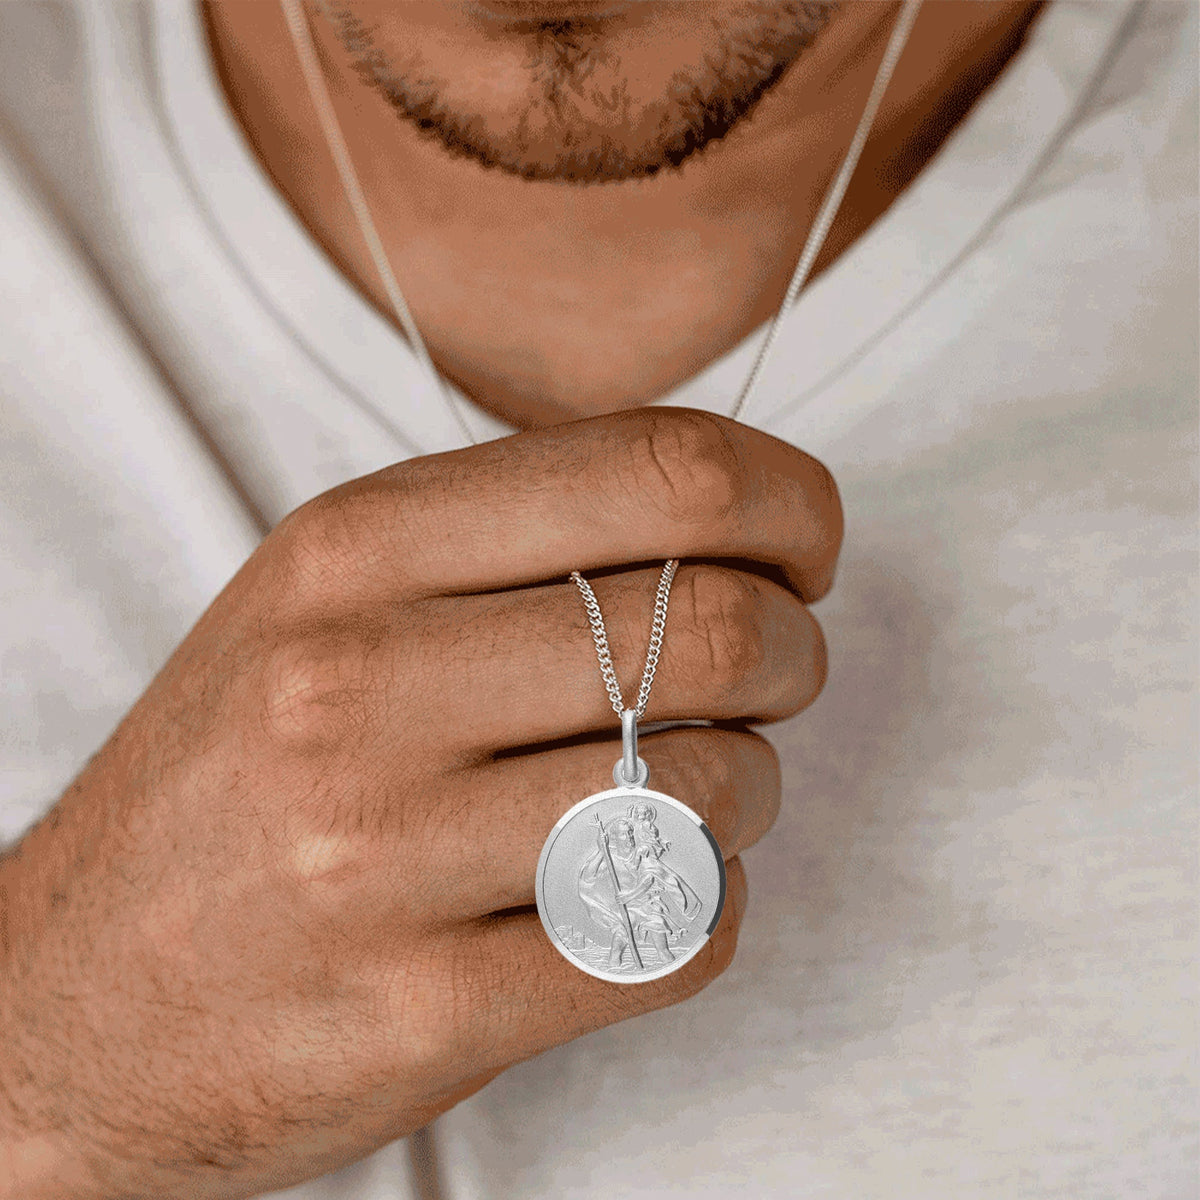 27mm large heavy silver st christopher necklace for men